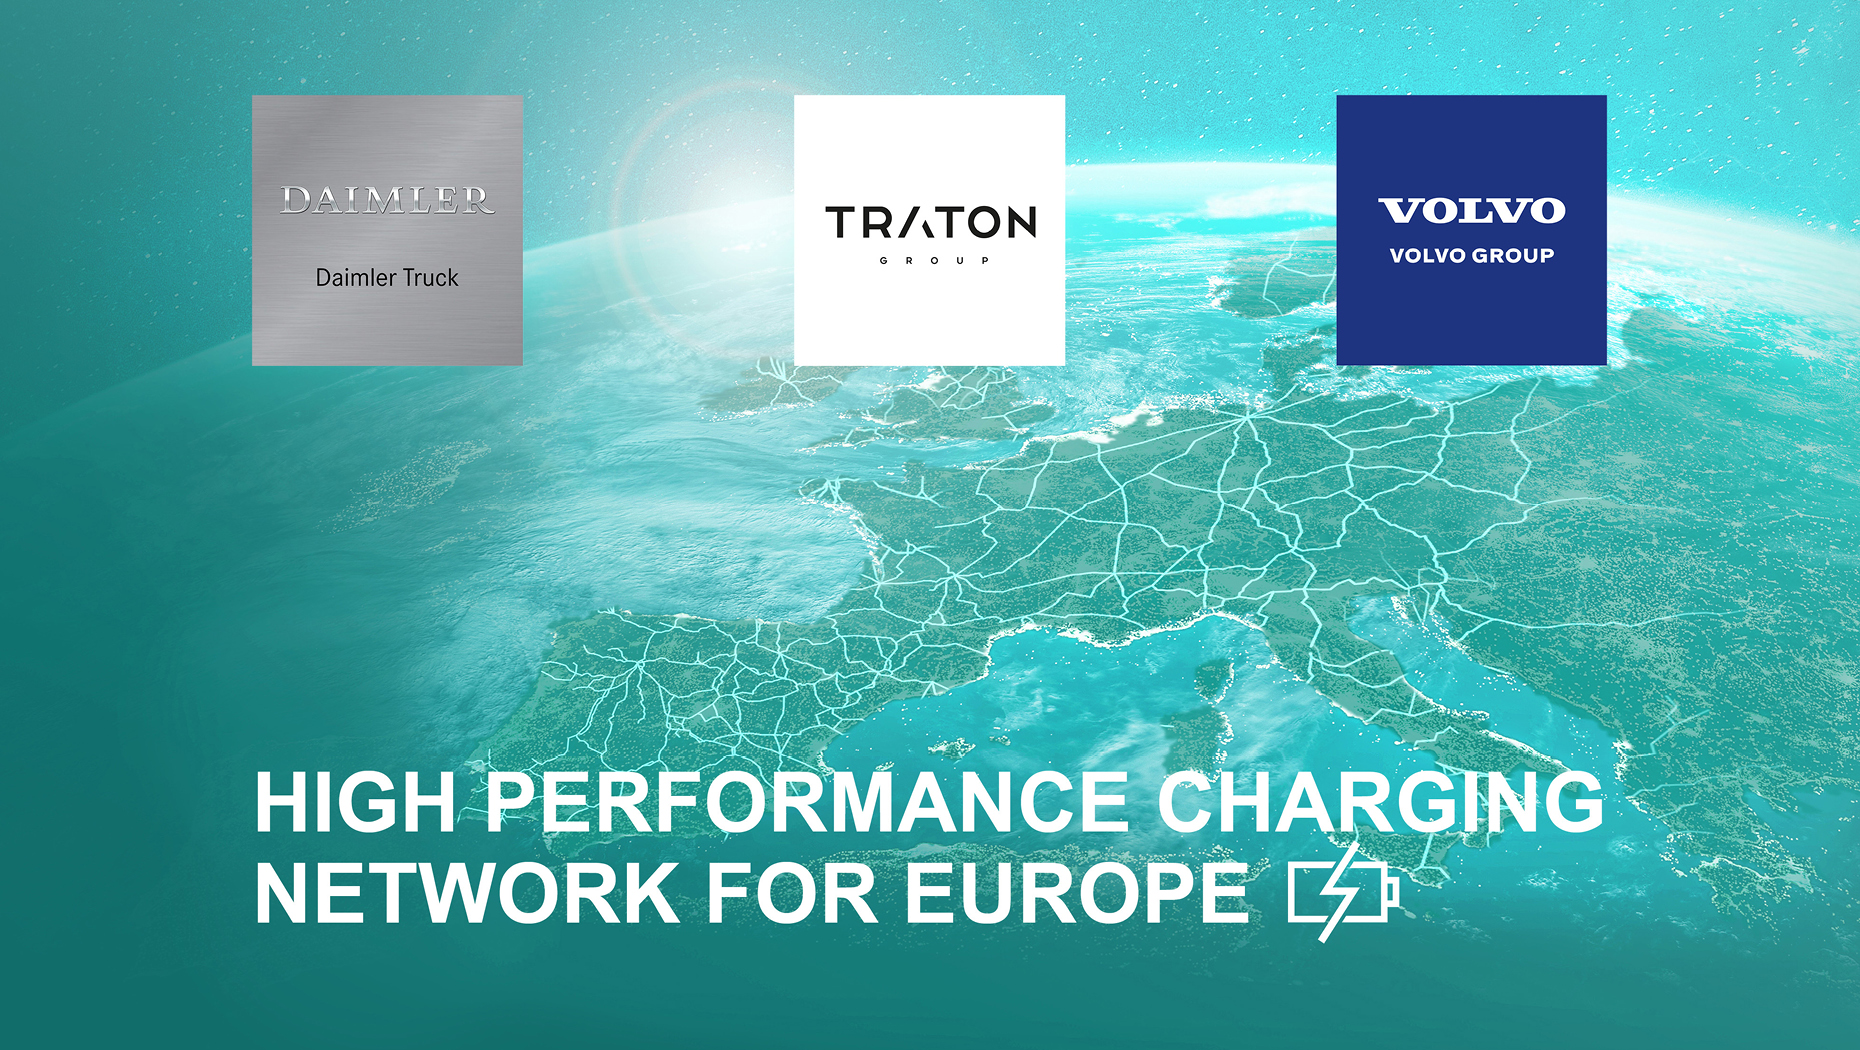 European truck makers jointly to roll out 1 700 fast-chargers